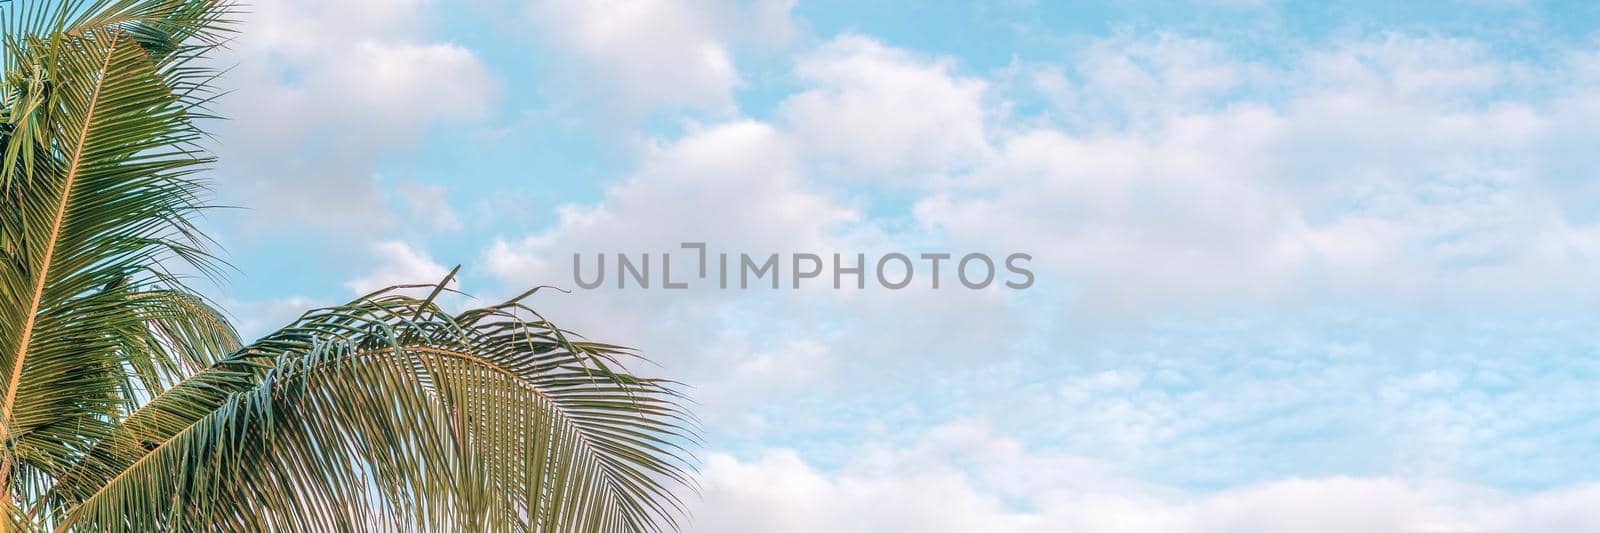 BANNER, LONG FORMAT Atmosphere panorama white cloud sky alone tropical palm tree background summer by nandrey85